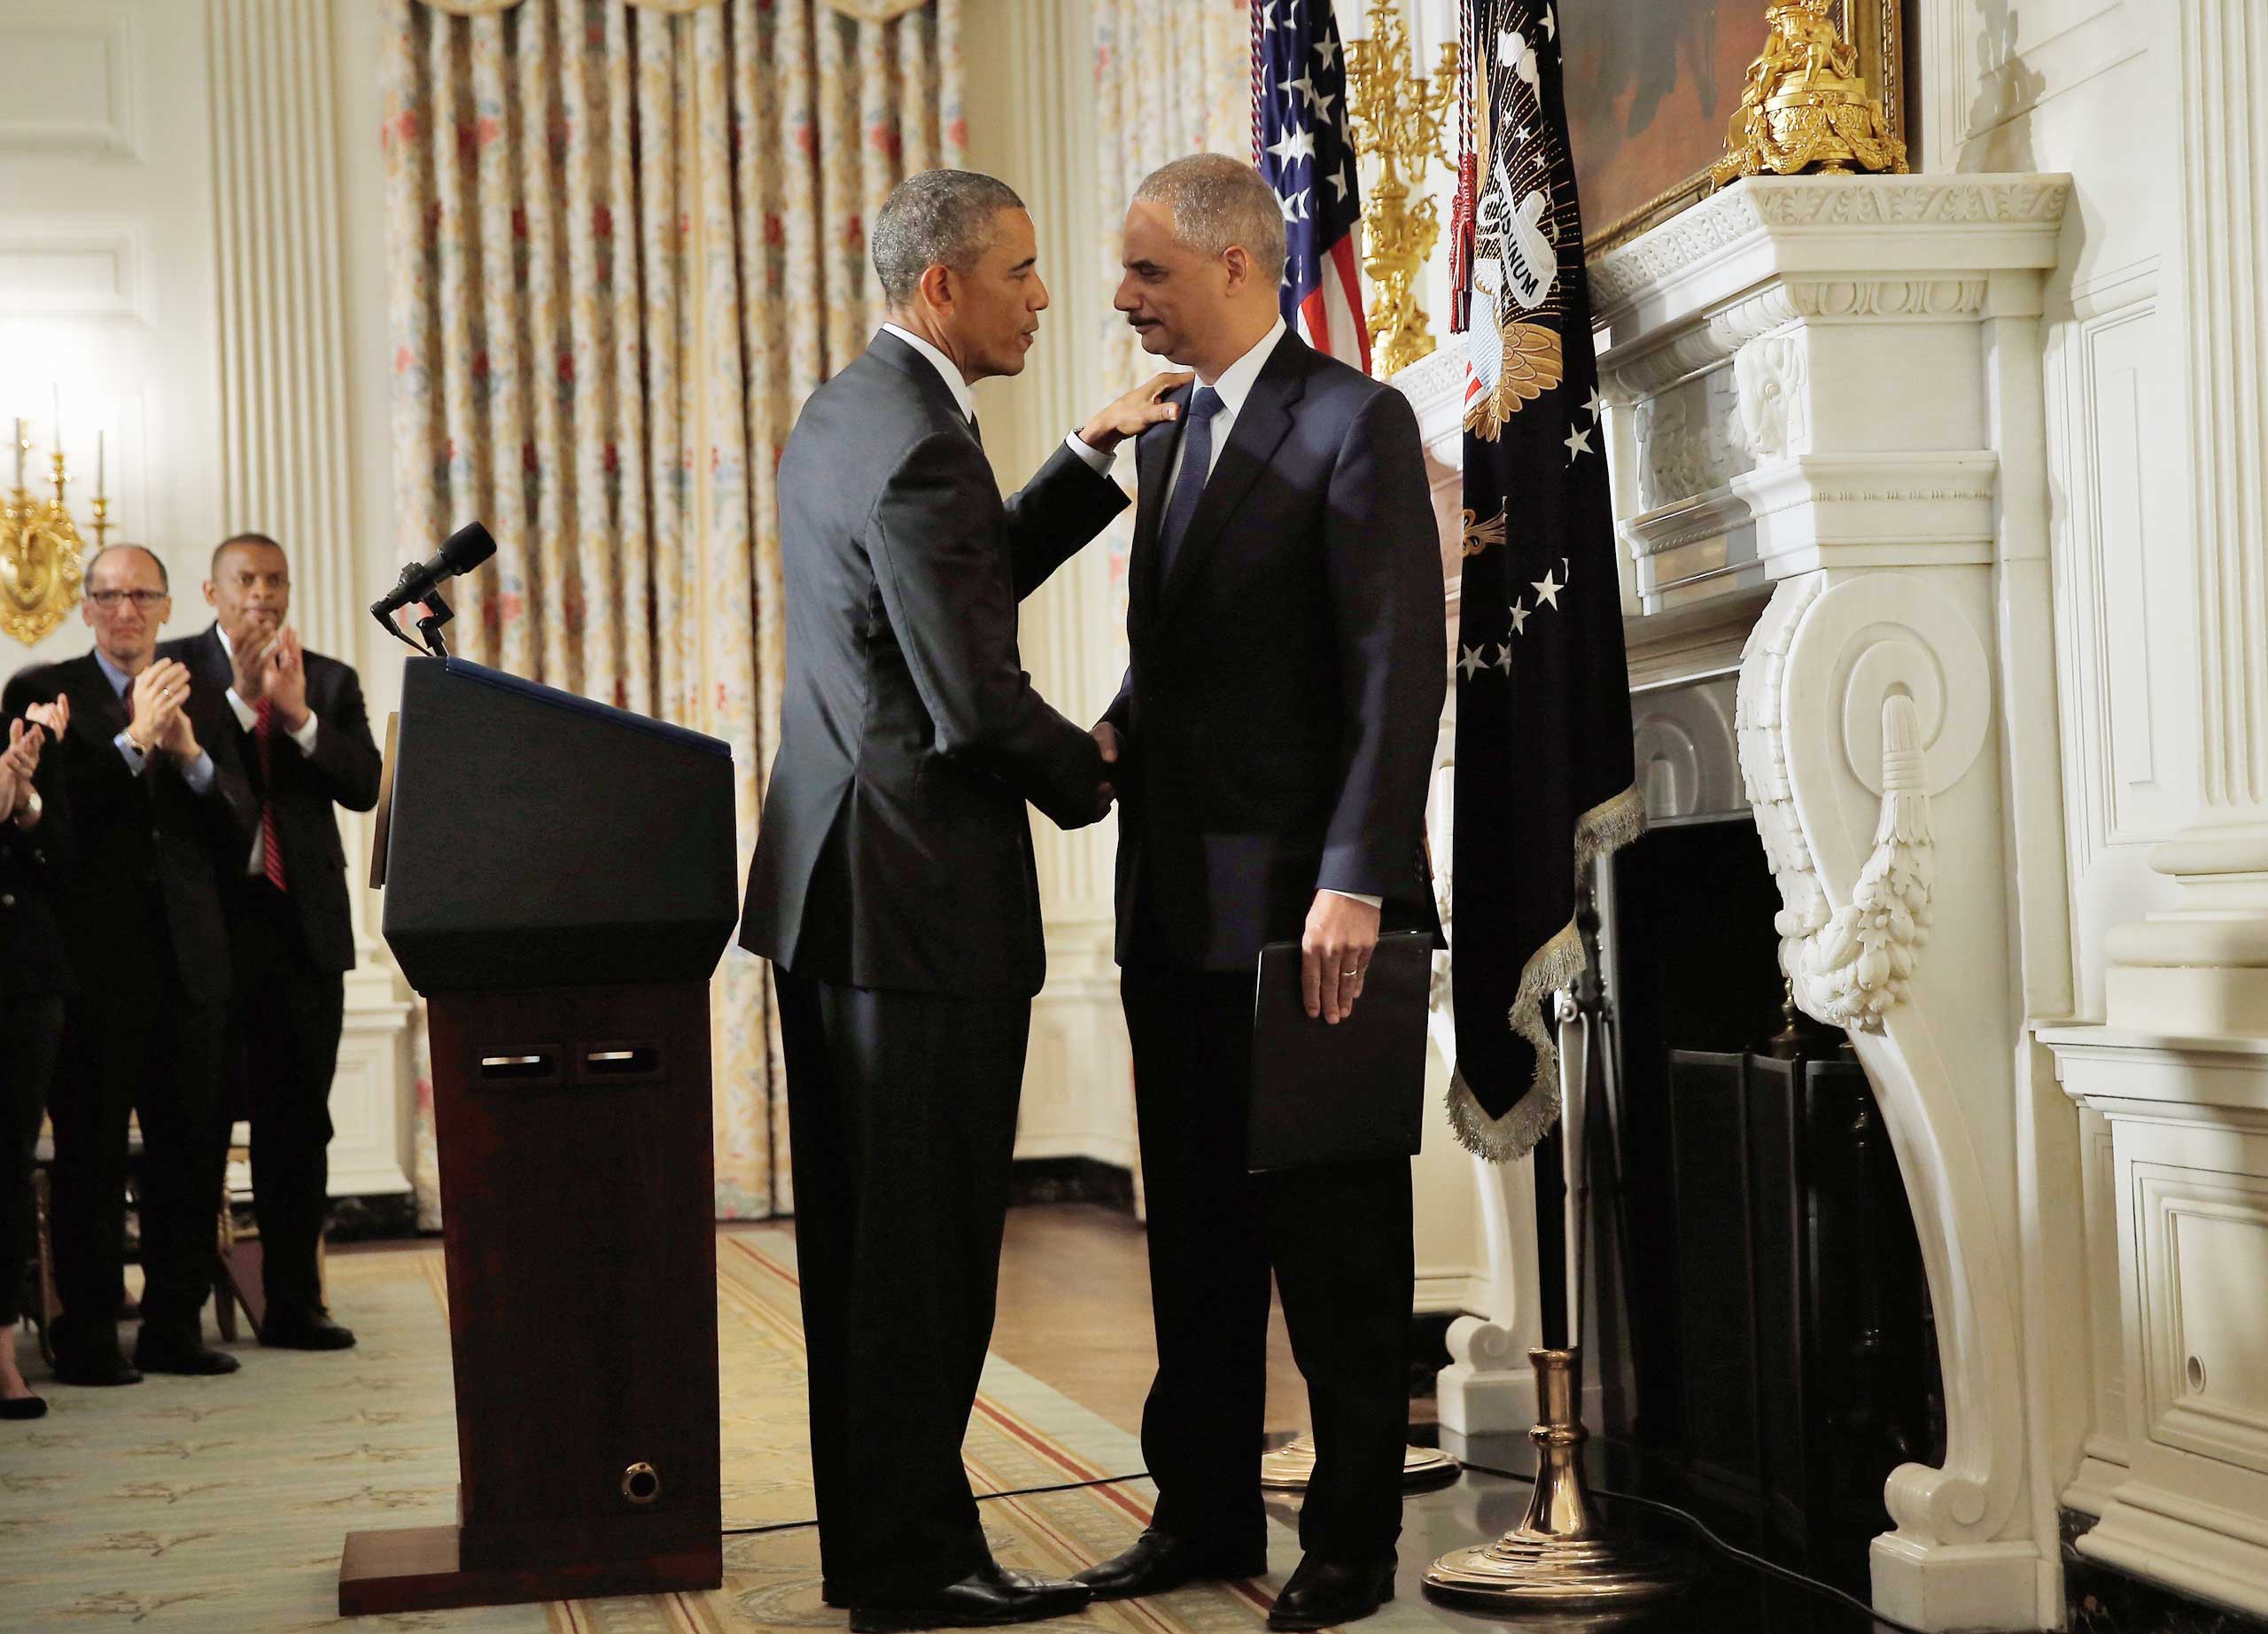 President Barack Obama shakes hands with Attorney General Eric H. Holder Jr. who announced his resignation today, Sept. 25, 2014 in Washington, DC. (Win McNamee—Getty Images)